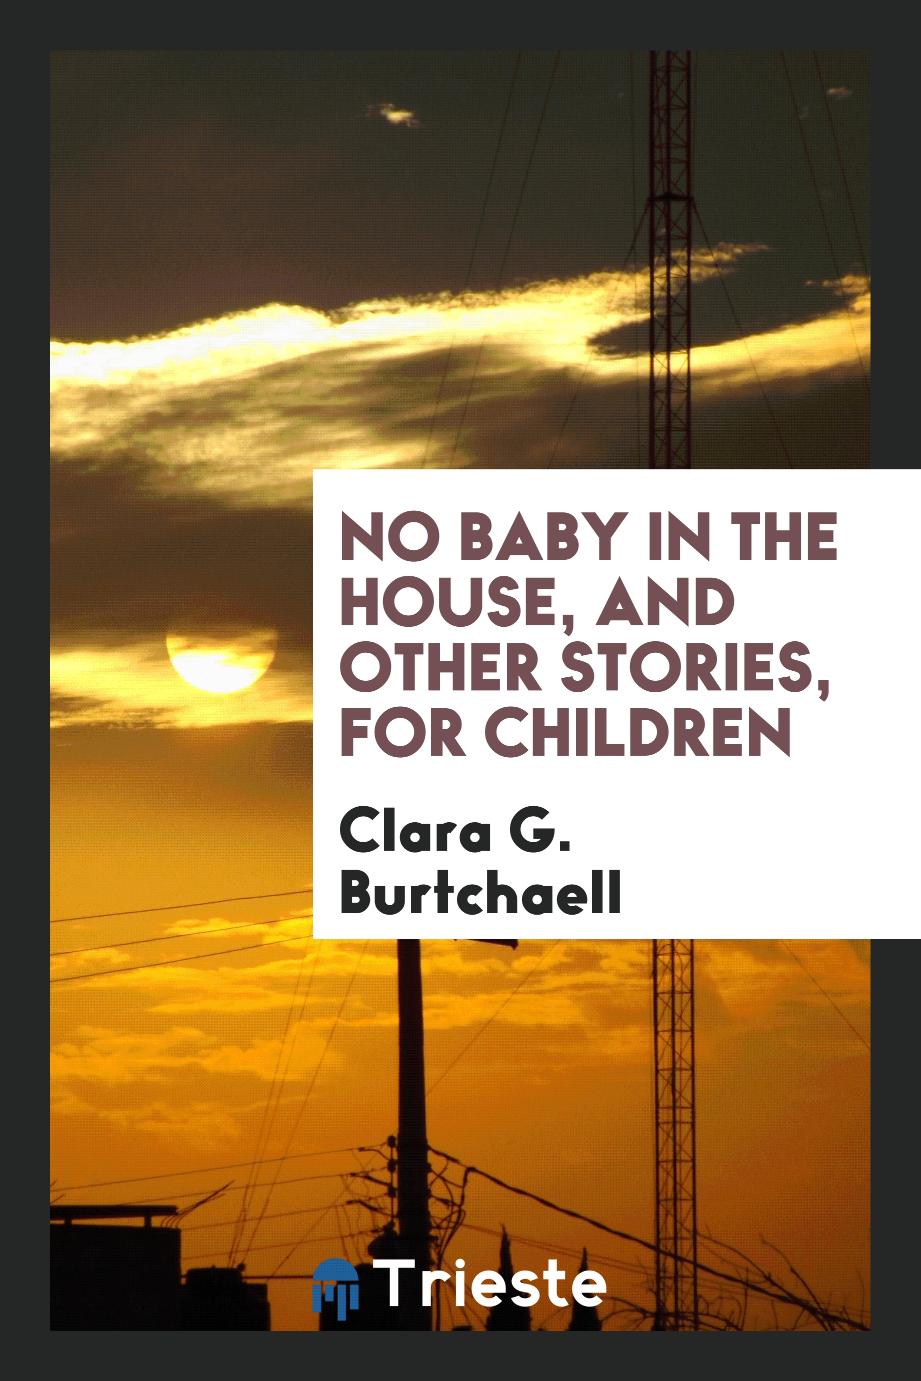 No baby in the house, and other stories, for children